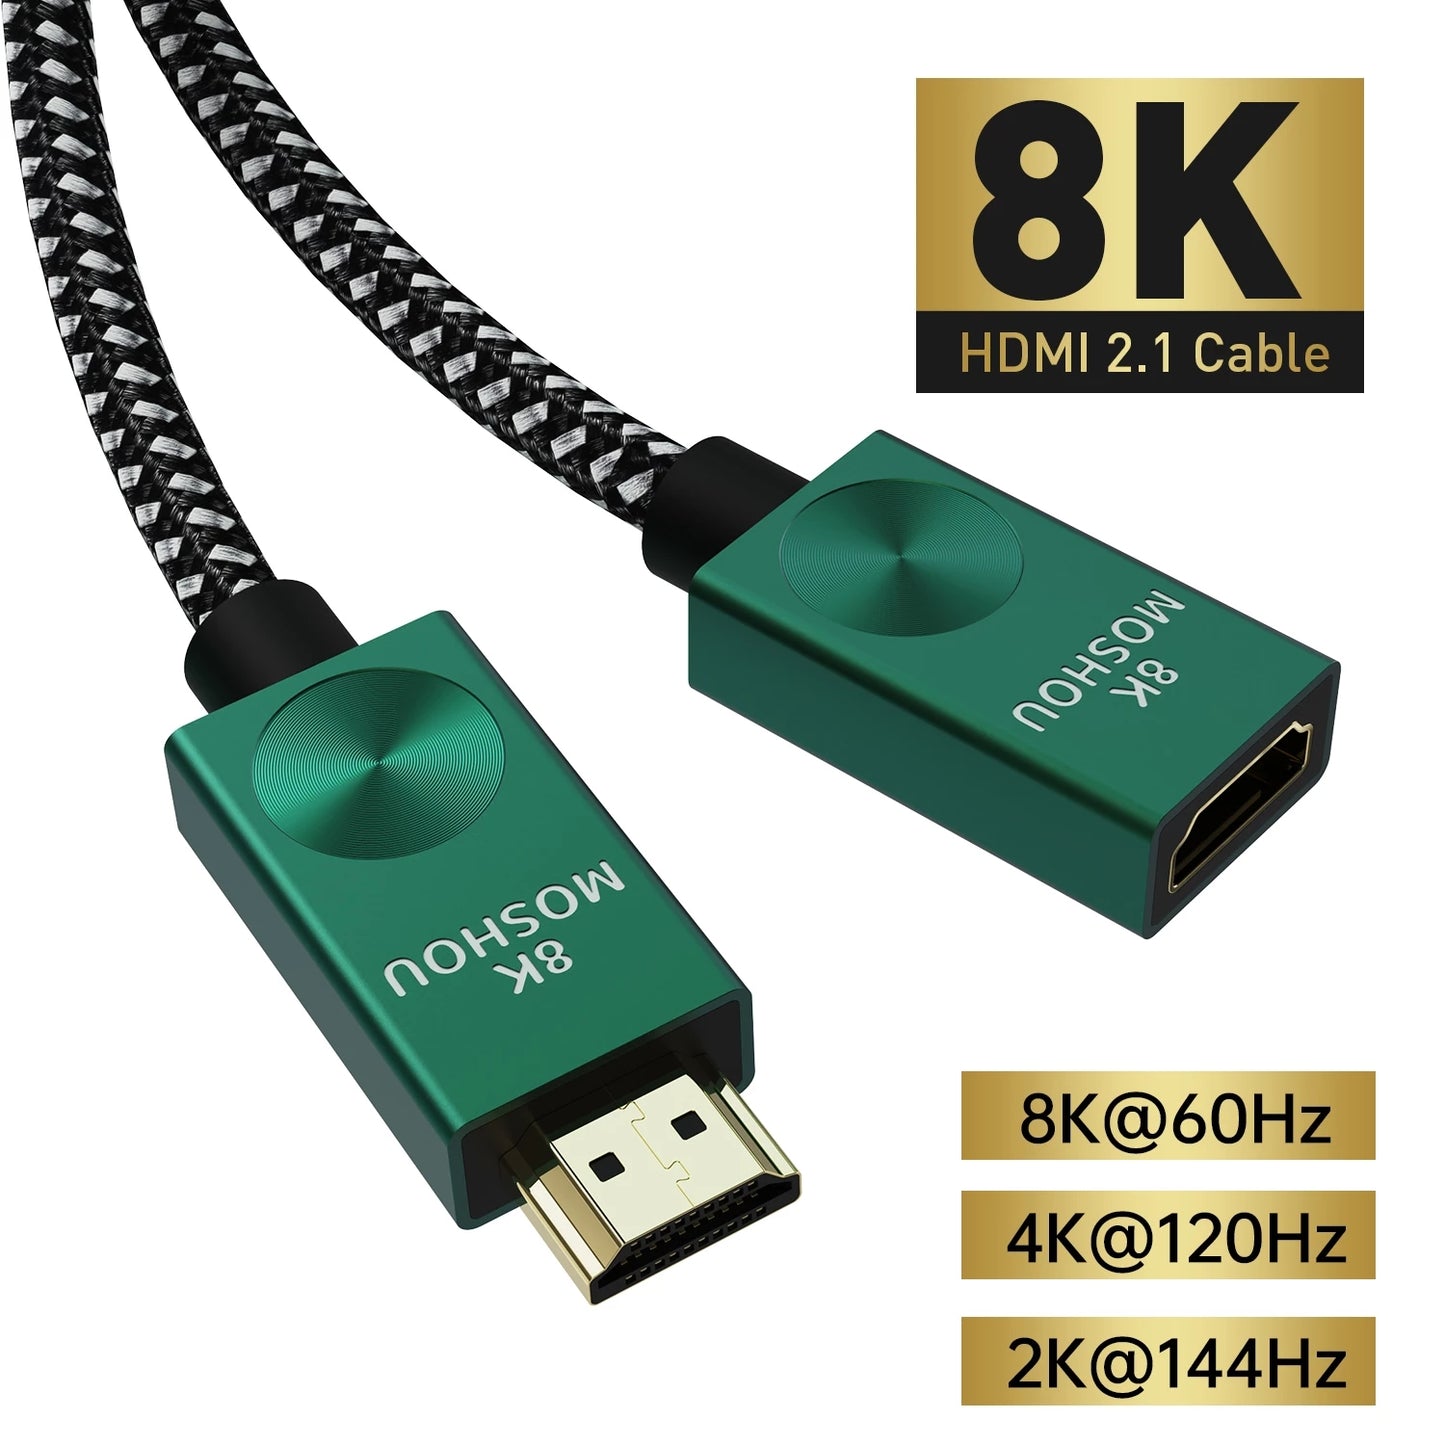 HDMI 2.1 Cable 8K 60Hz 4K 120Hz 48Gbps eARC HDR Video Male to Female Cable Female to Male Cord